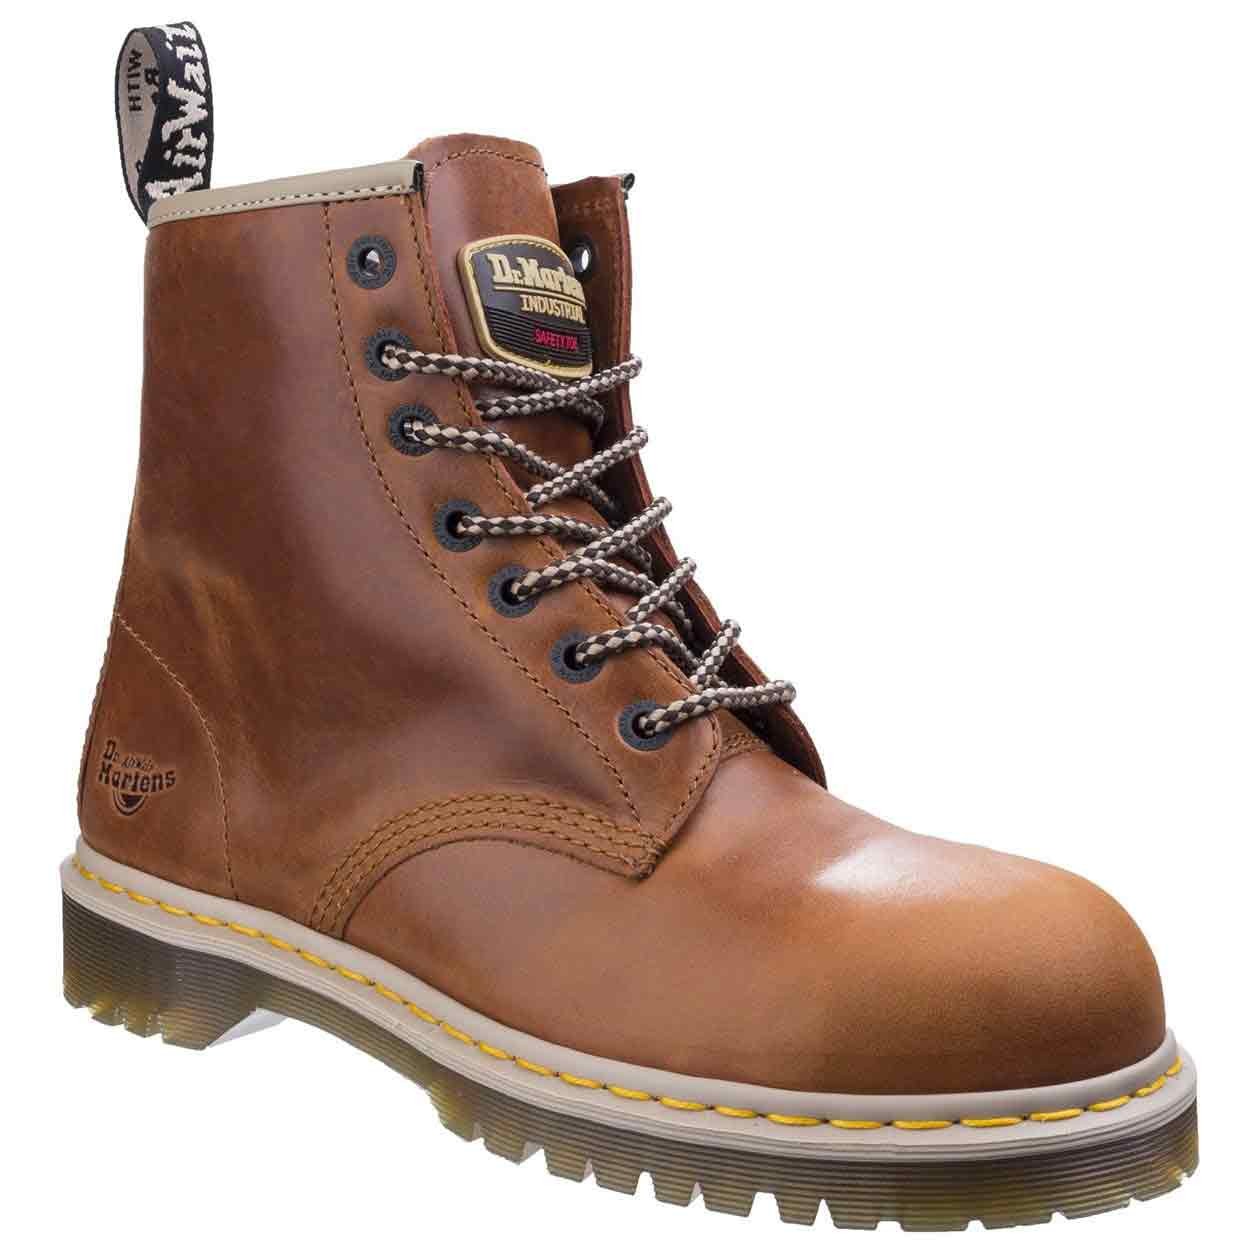 Dr Martens Icon 7B10 - Standard Safety Boots - Mens Safety Boots & Shoes -  Safety Footwear - Best Workwear